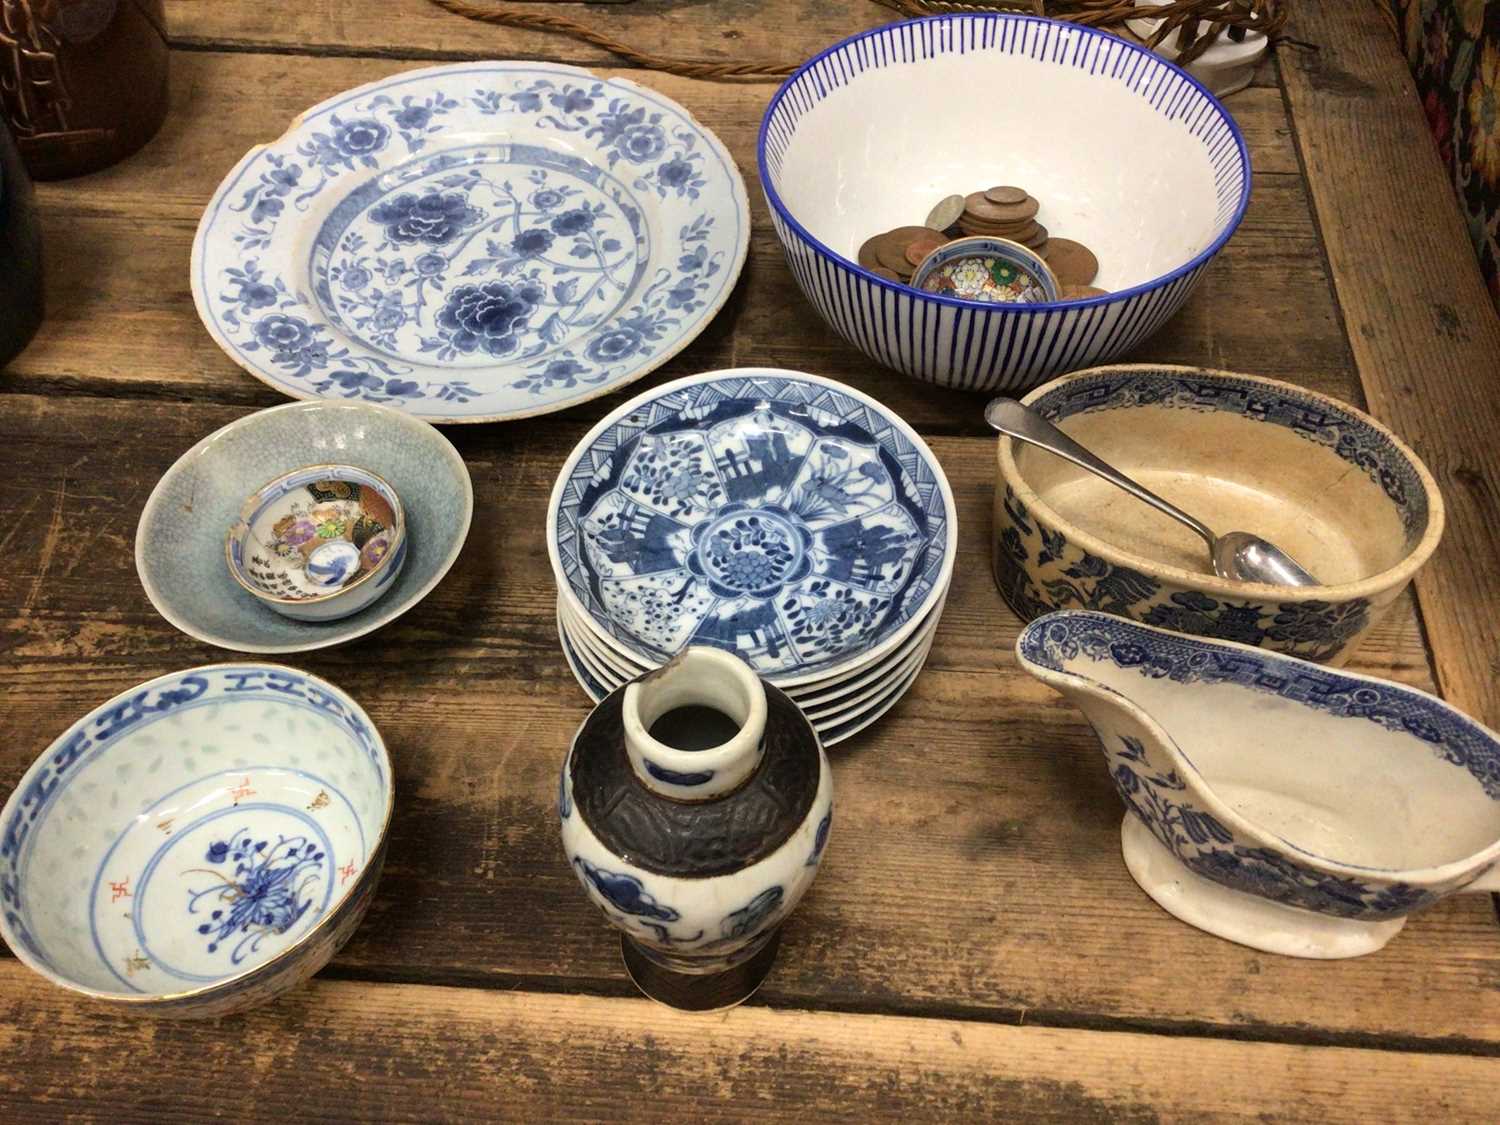 Lot 44 - 18th century delft plate, Chinese porcelain and other sundries